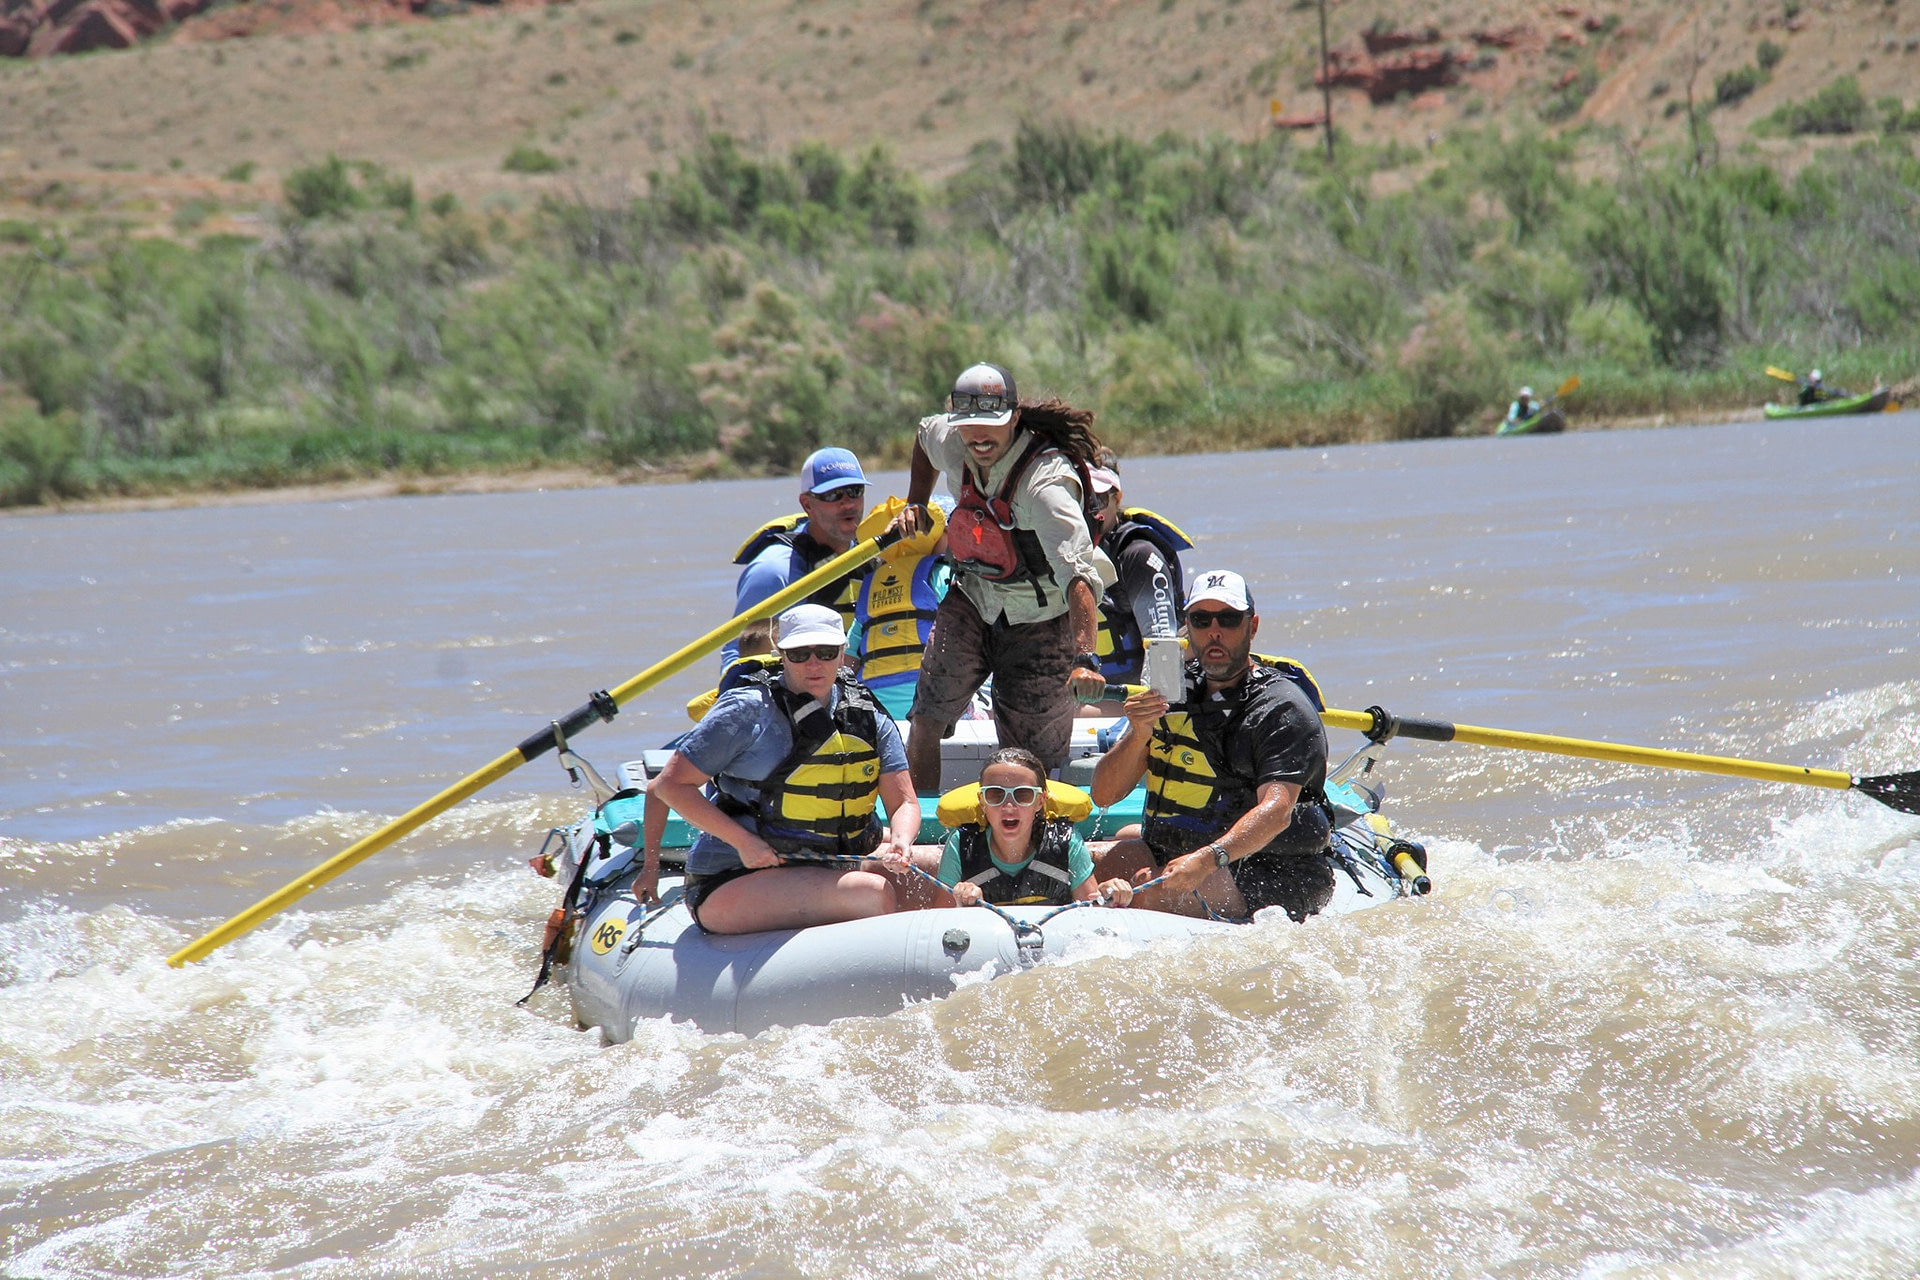 Experience the Best of Moab by Land, Air, and Water!